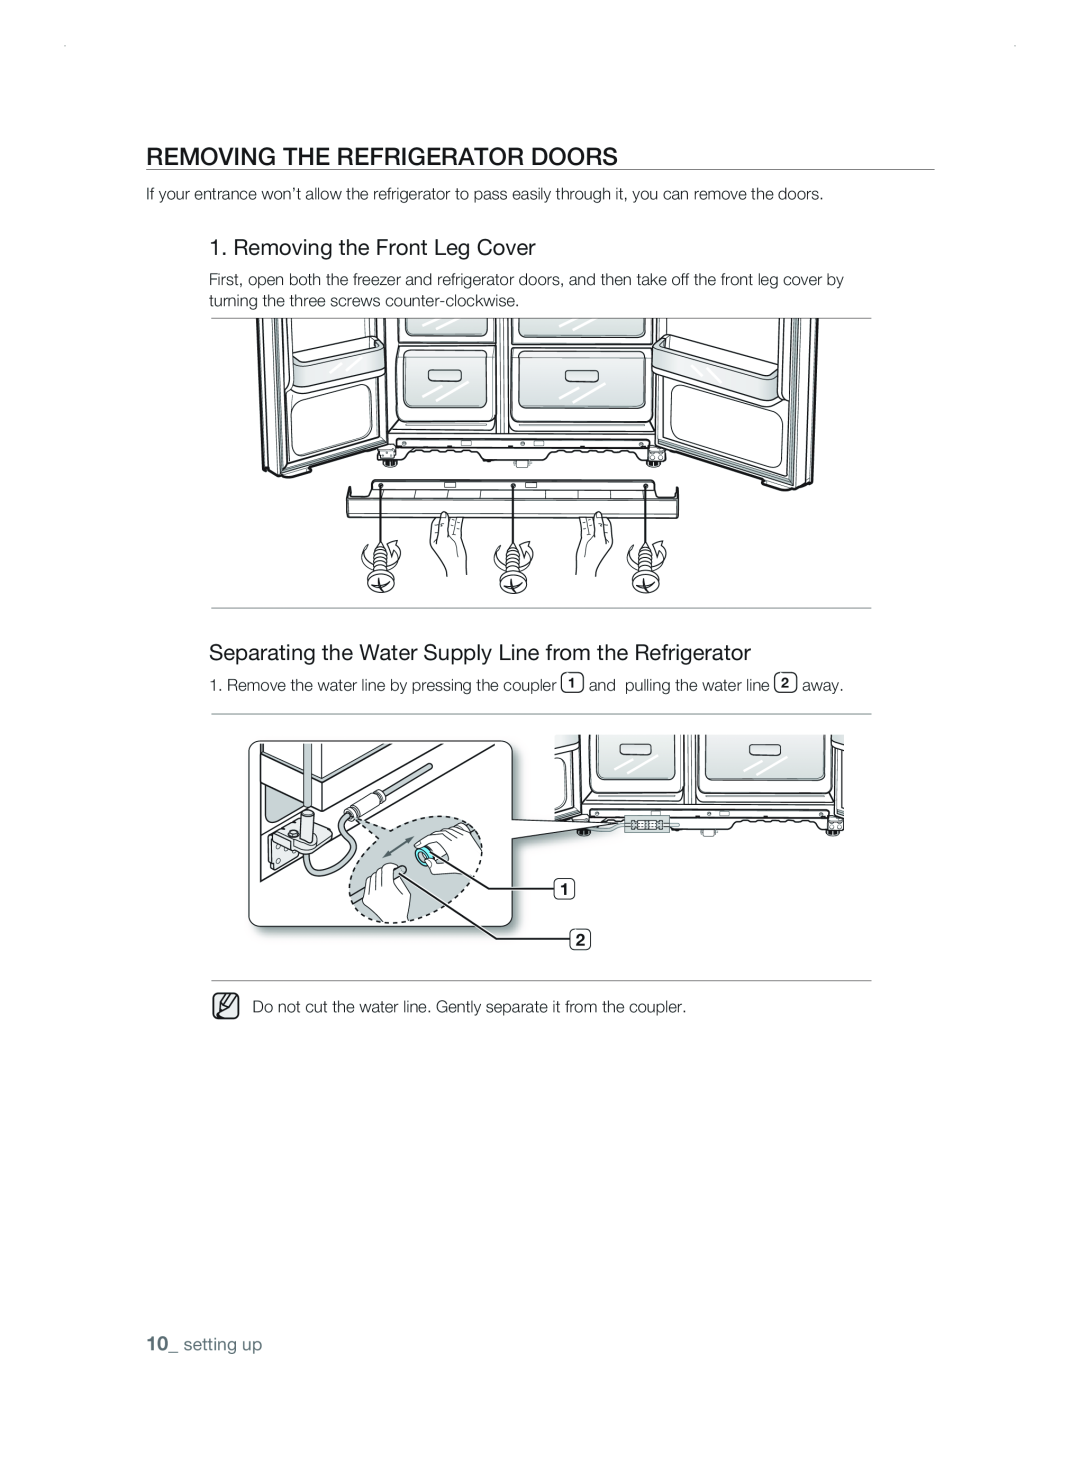 Samsung RSH3D, RSH3N, RSH3F, RSH3K user manual rEMoVing tHE rEfrigErator Doors, Removing the Front Leg Cover, setting up 